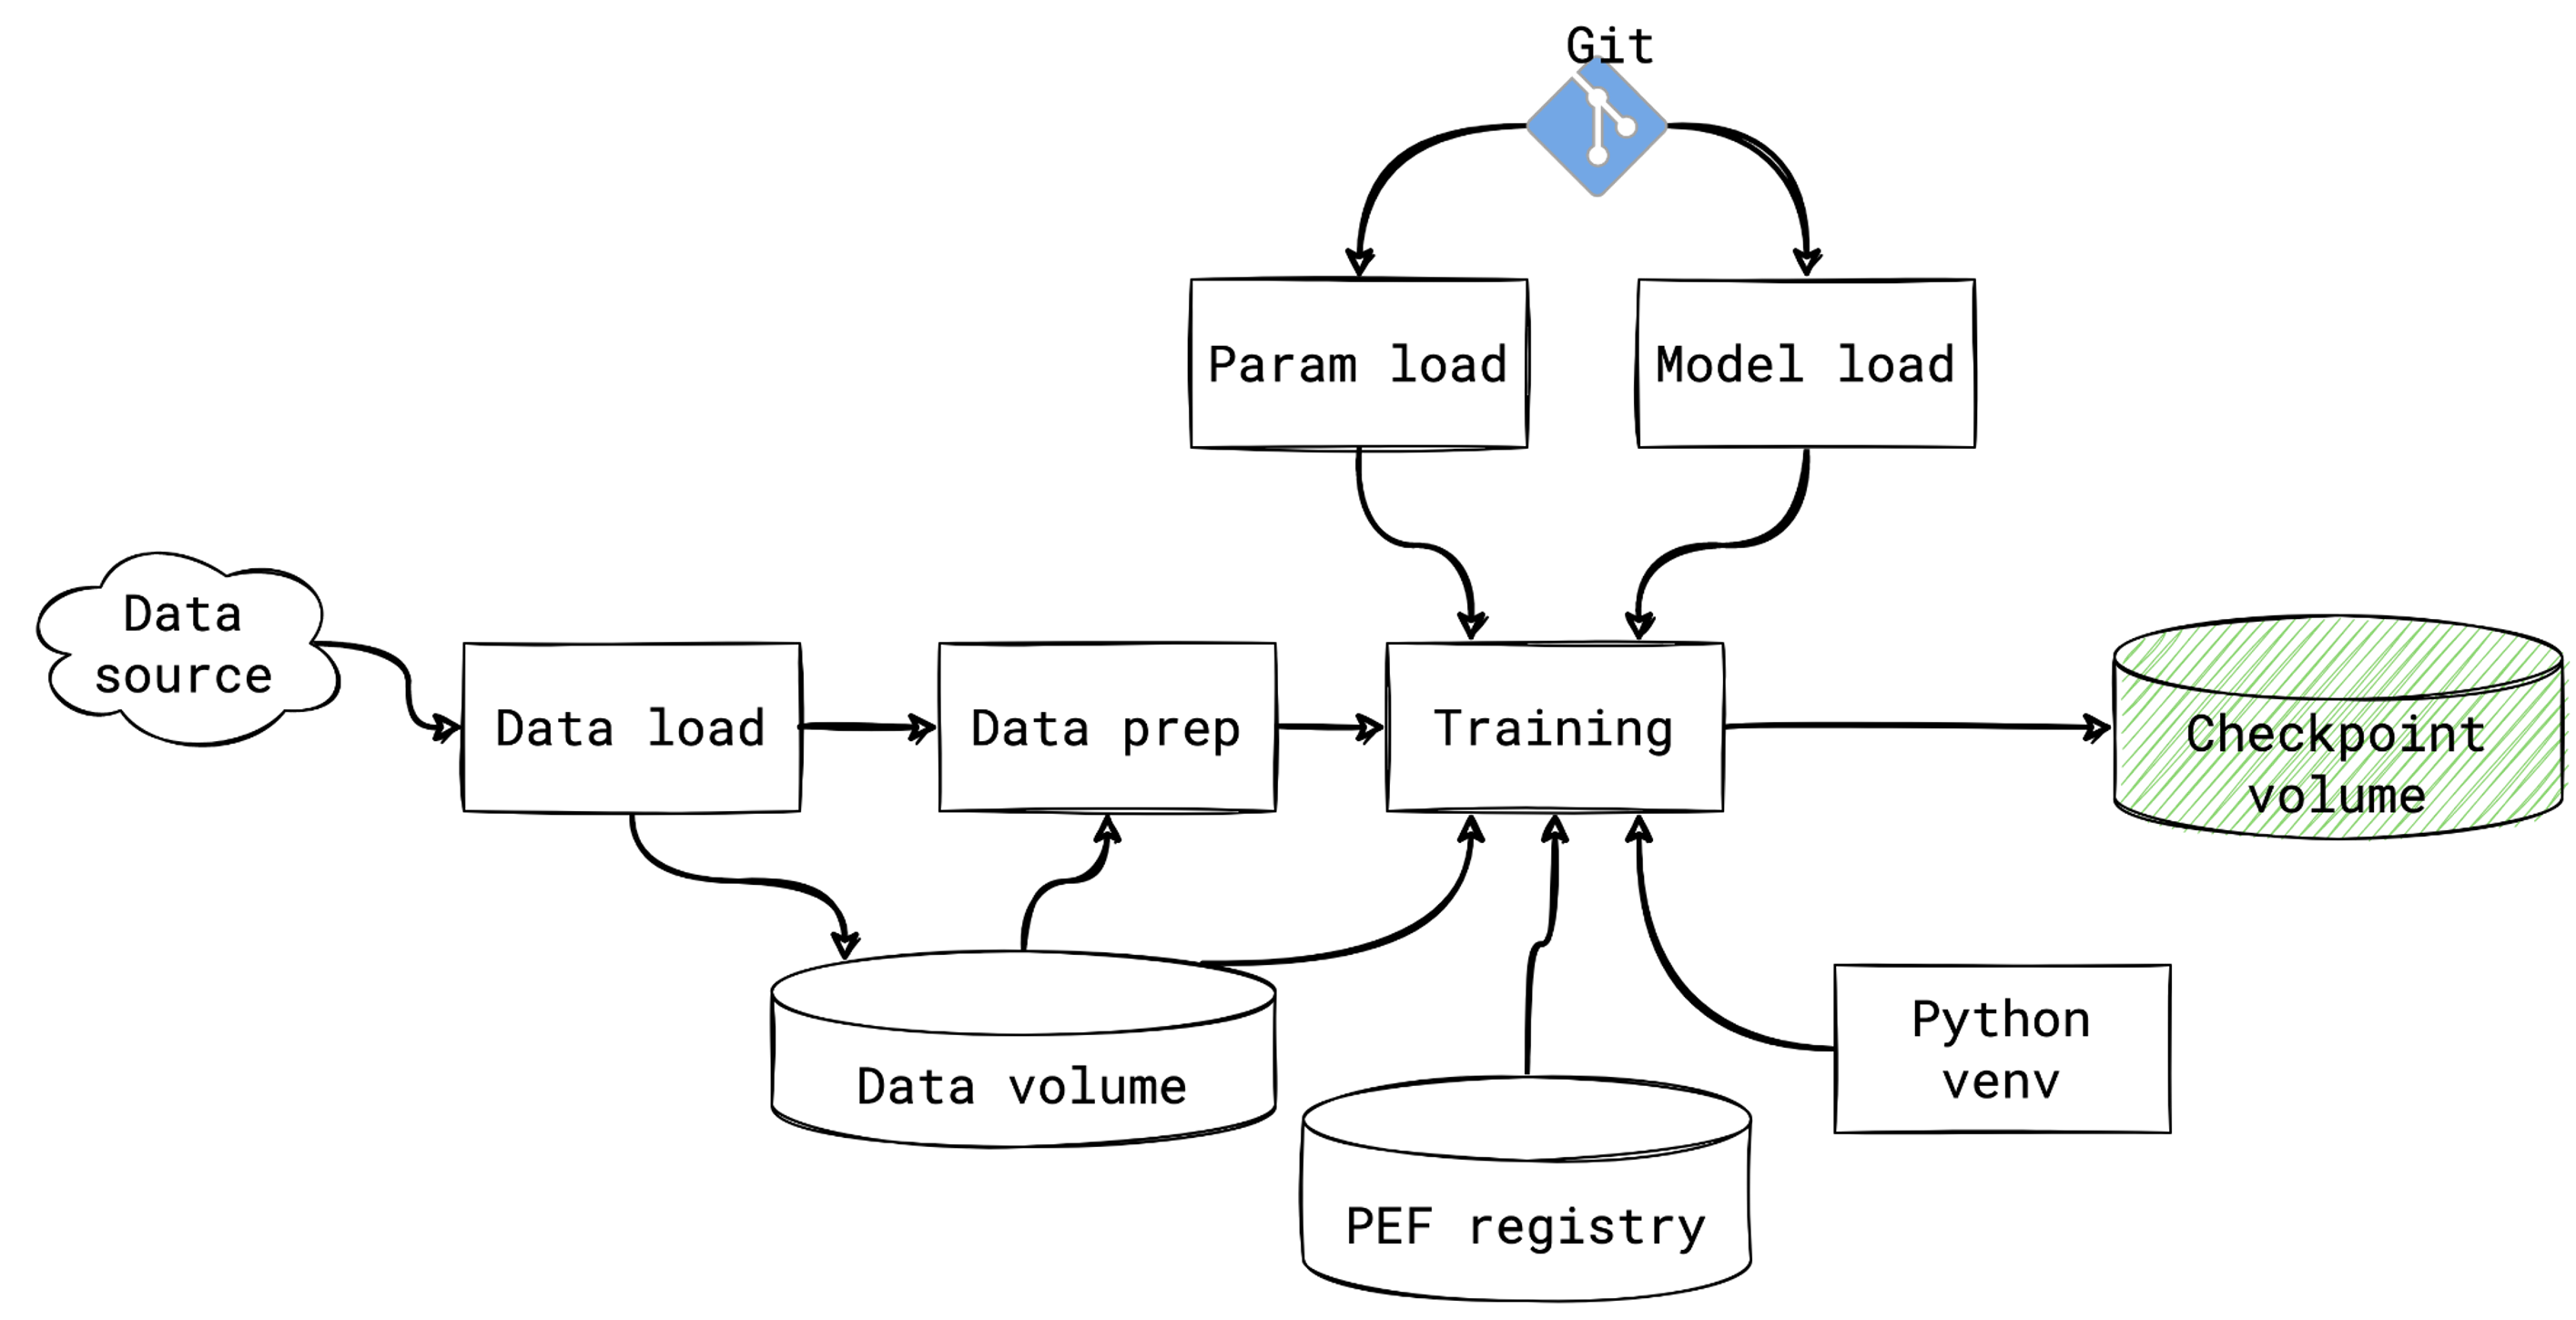 Diagram of the workflow explained in the text about training next